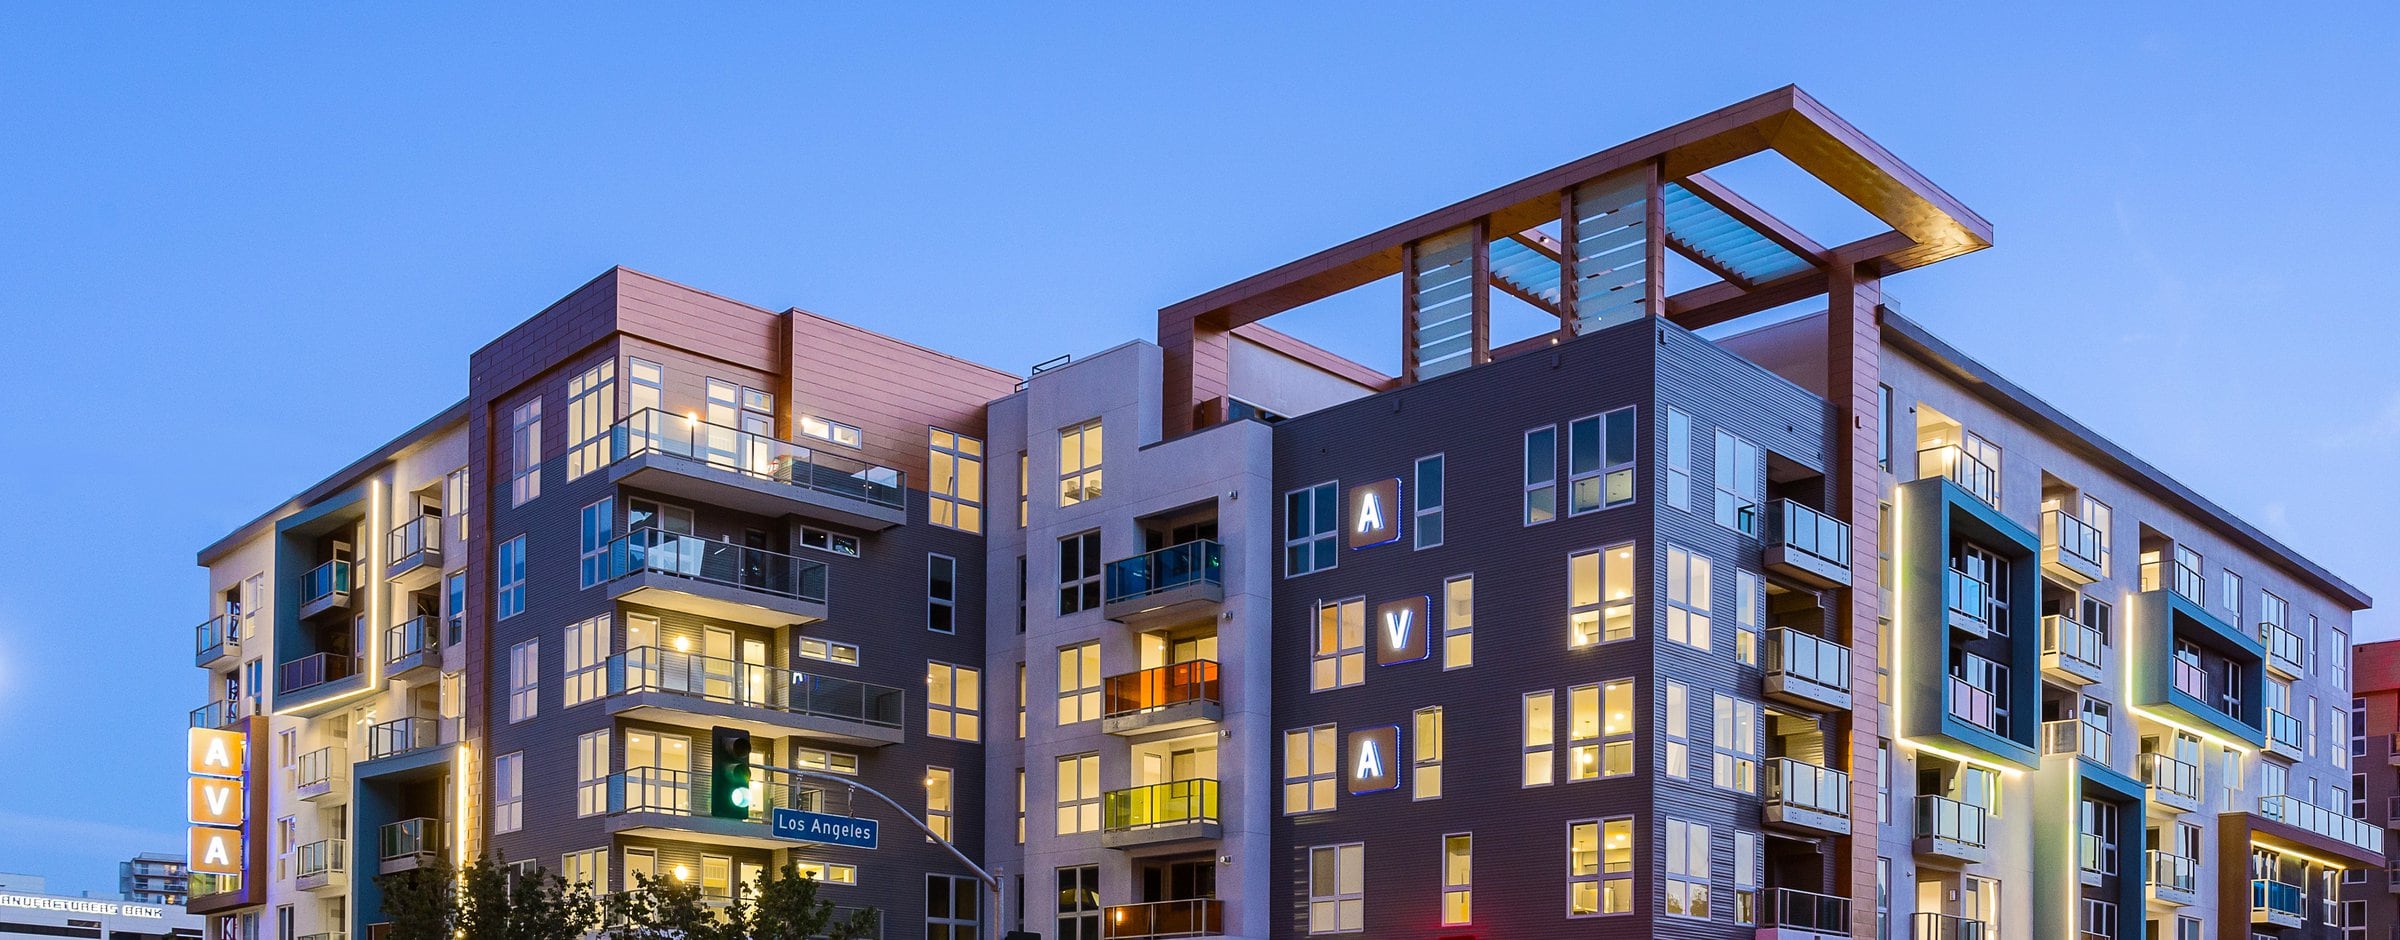 AVA Little Tokyo - Apartments in Los Angeles, CA | AvalonBay Communities |  AvalonBay Communities